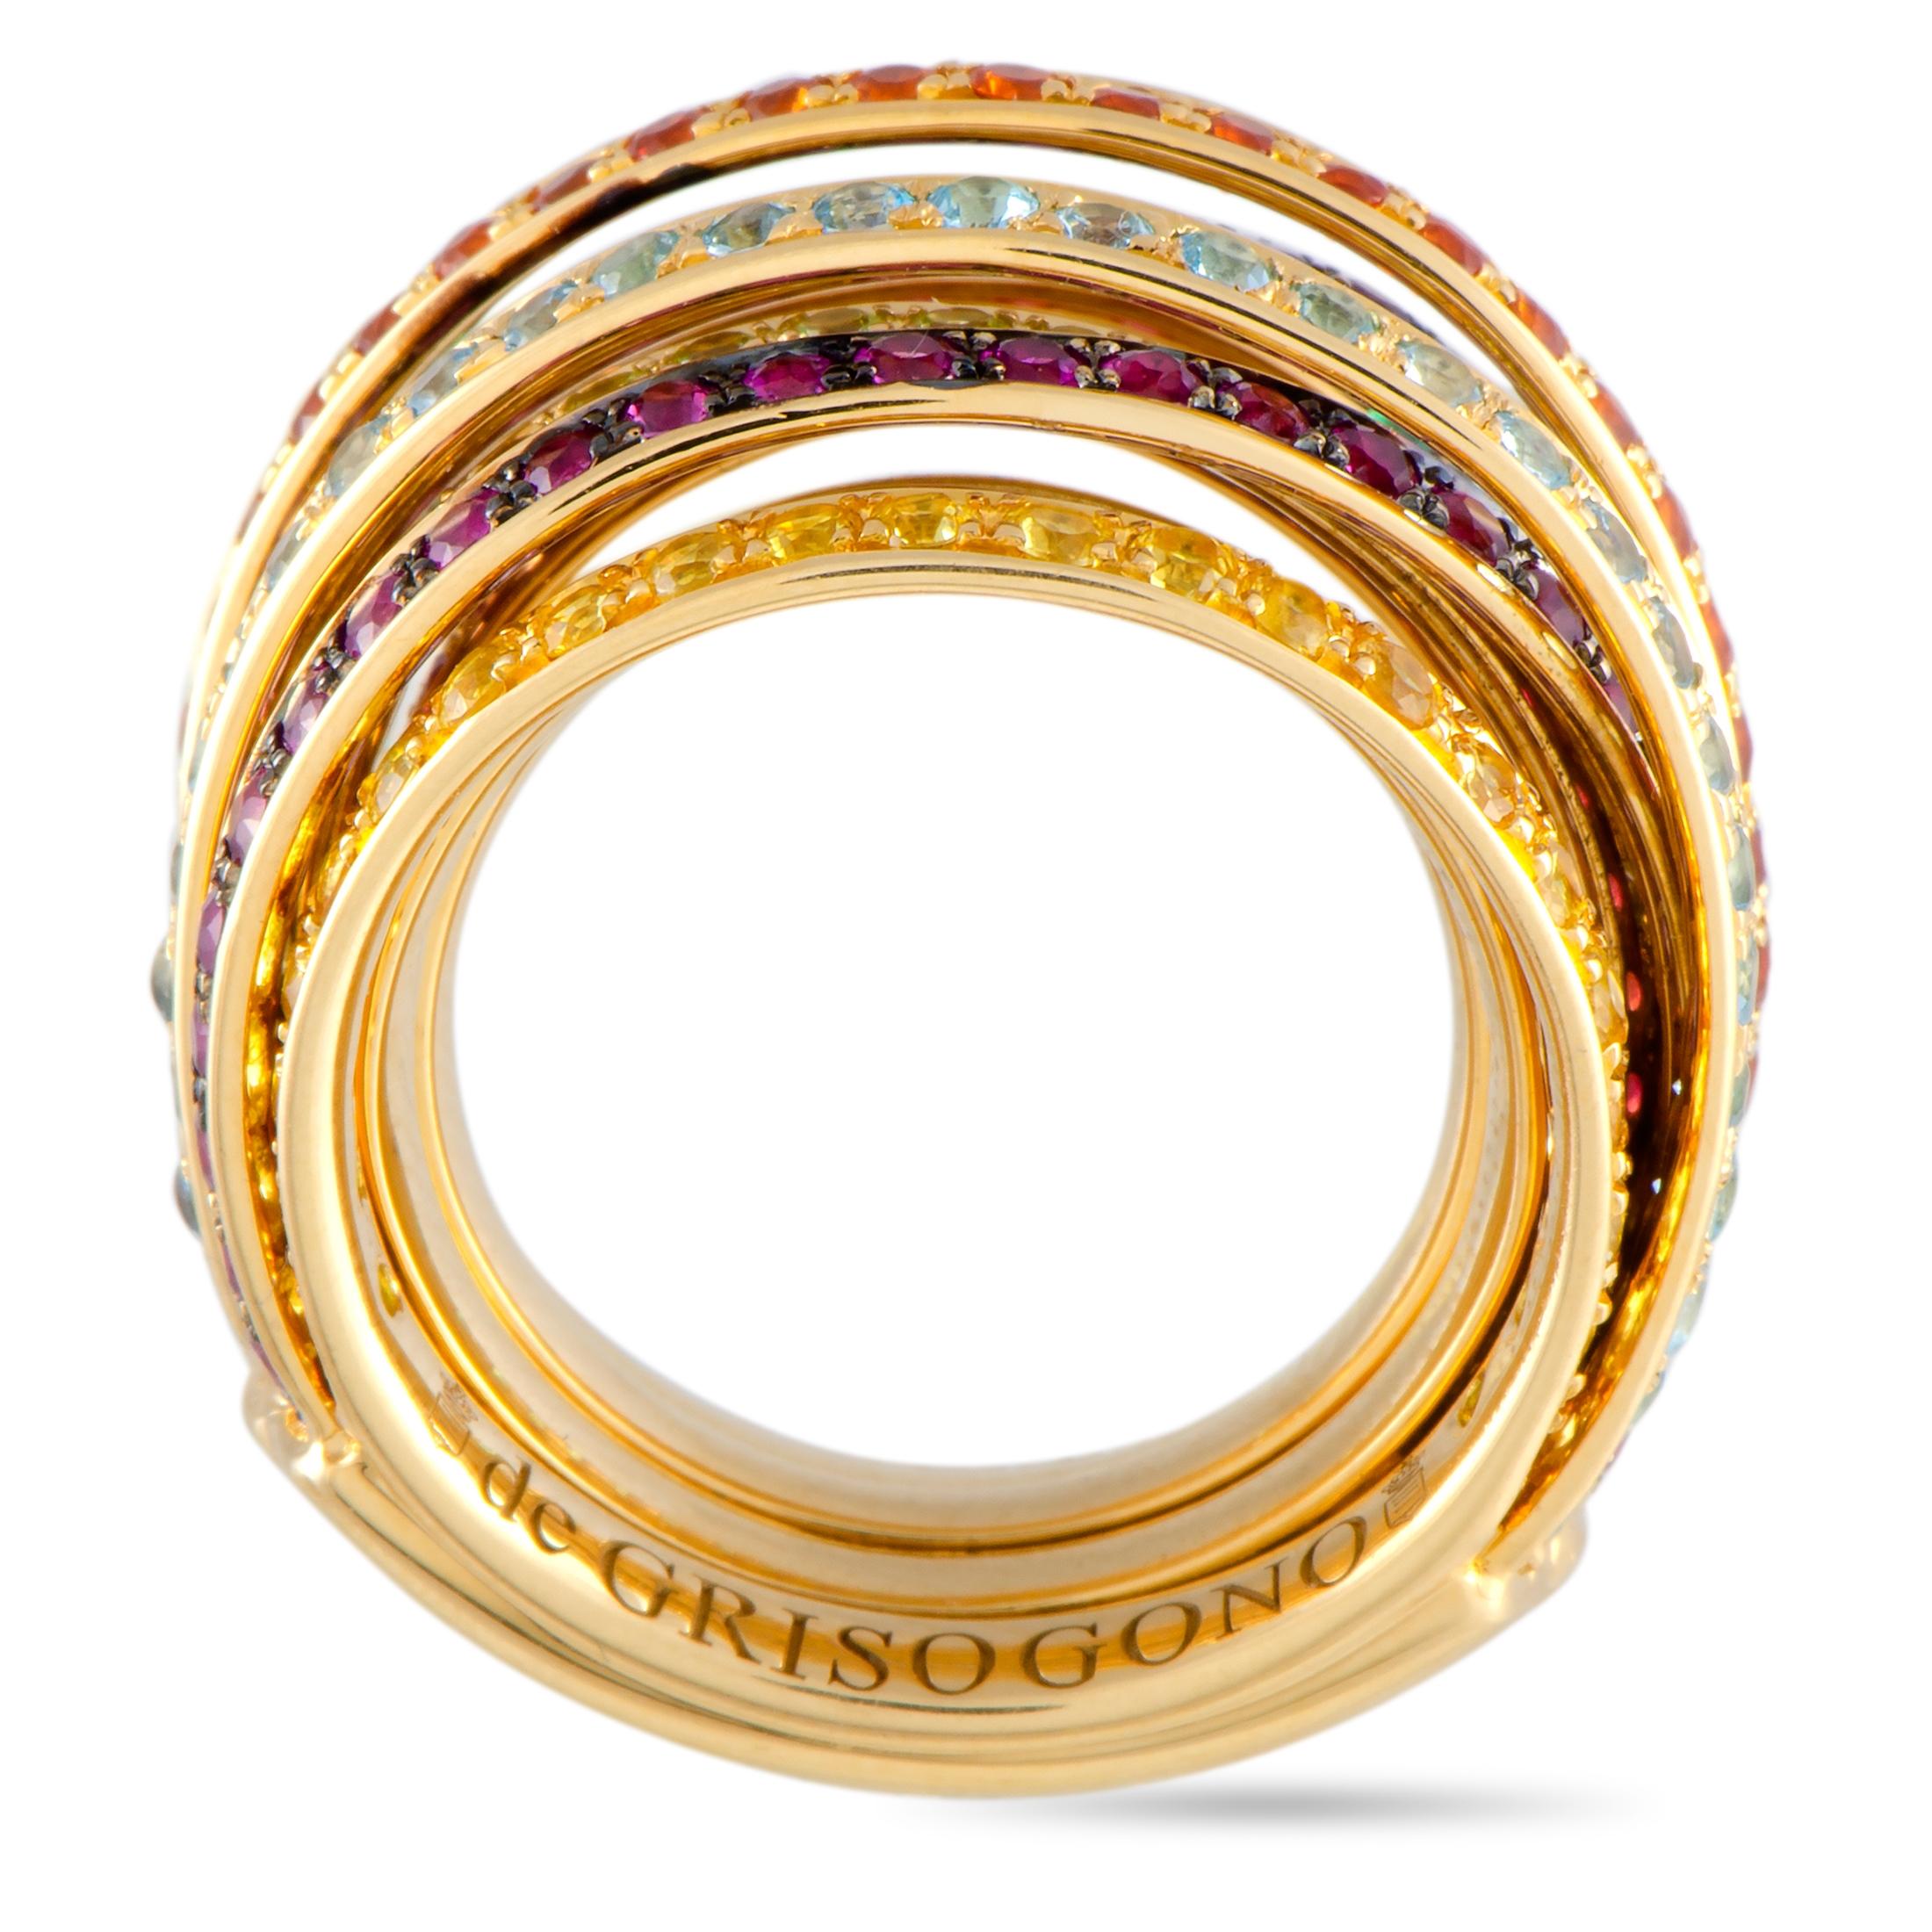 The de Grisogono “Allegra” ring is crafted from 18K yellow gold and set with a plethora of multi-colored sapphires. The ring weighs 23.4 grams, boasting band thickness of 11 mm and top height of 7 mm, while top dimensions measure 26 by 16 mm.
 
